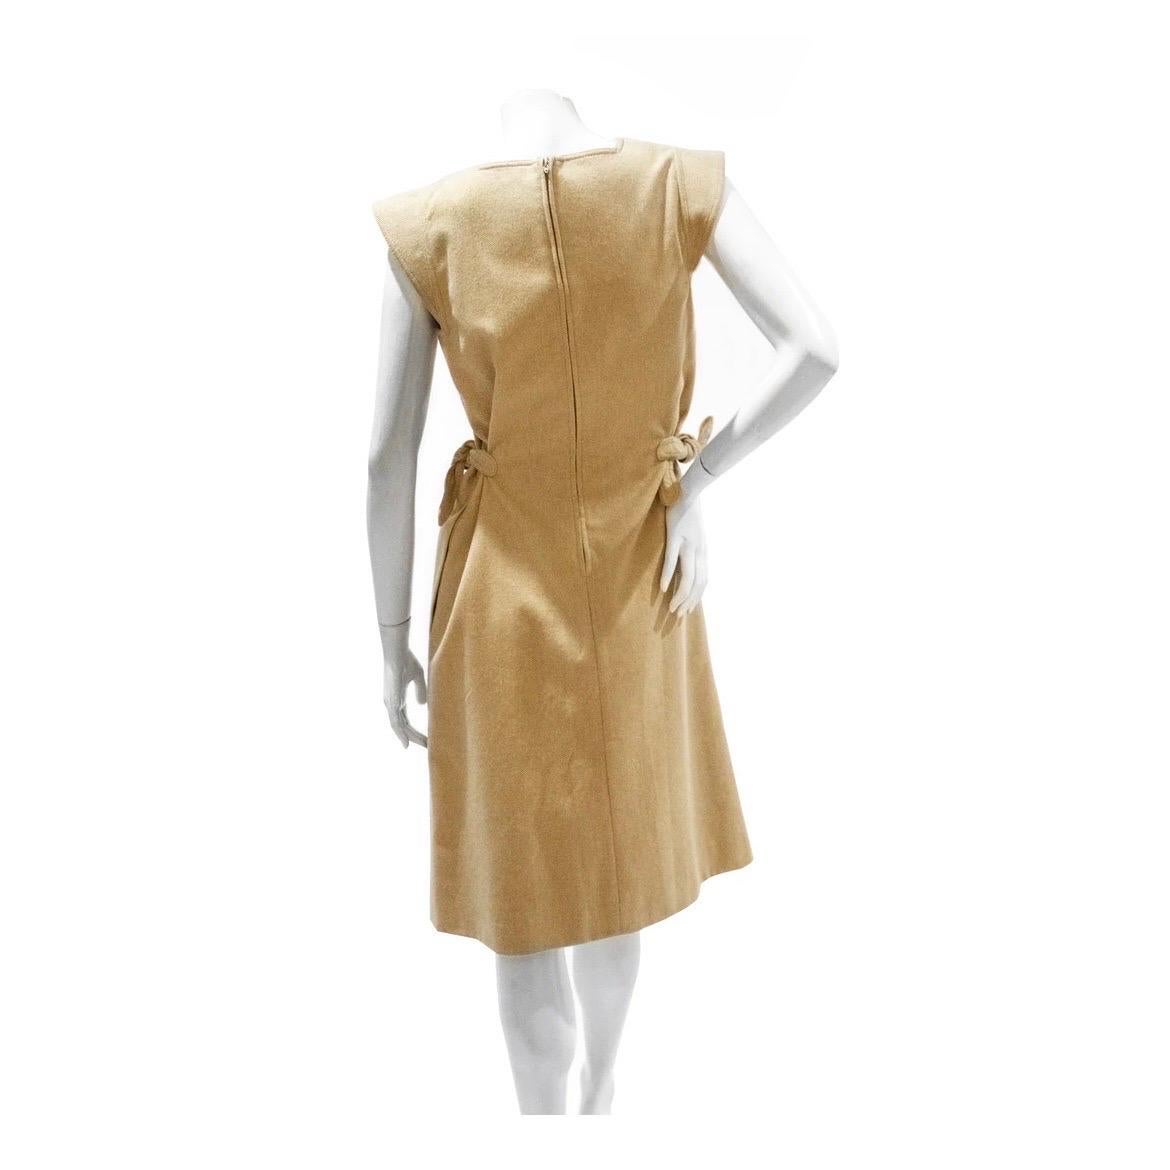 Pierre Cardin Dress 
Circa late 1960's or early 1970's 
Vintage 
Tan Wool 
Square neckline 
Cap sleeve 
Tie knot detail on left and right side of waist 
Knot details are adjustable for fit 
The dress has an elegant pleat detail to its design 
Sheath